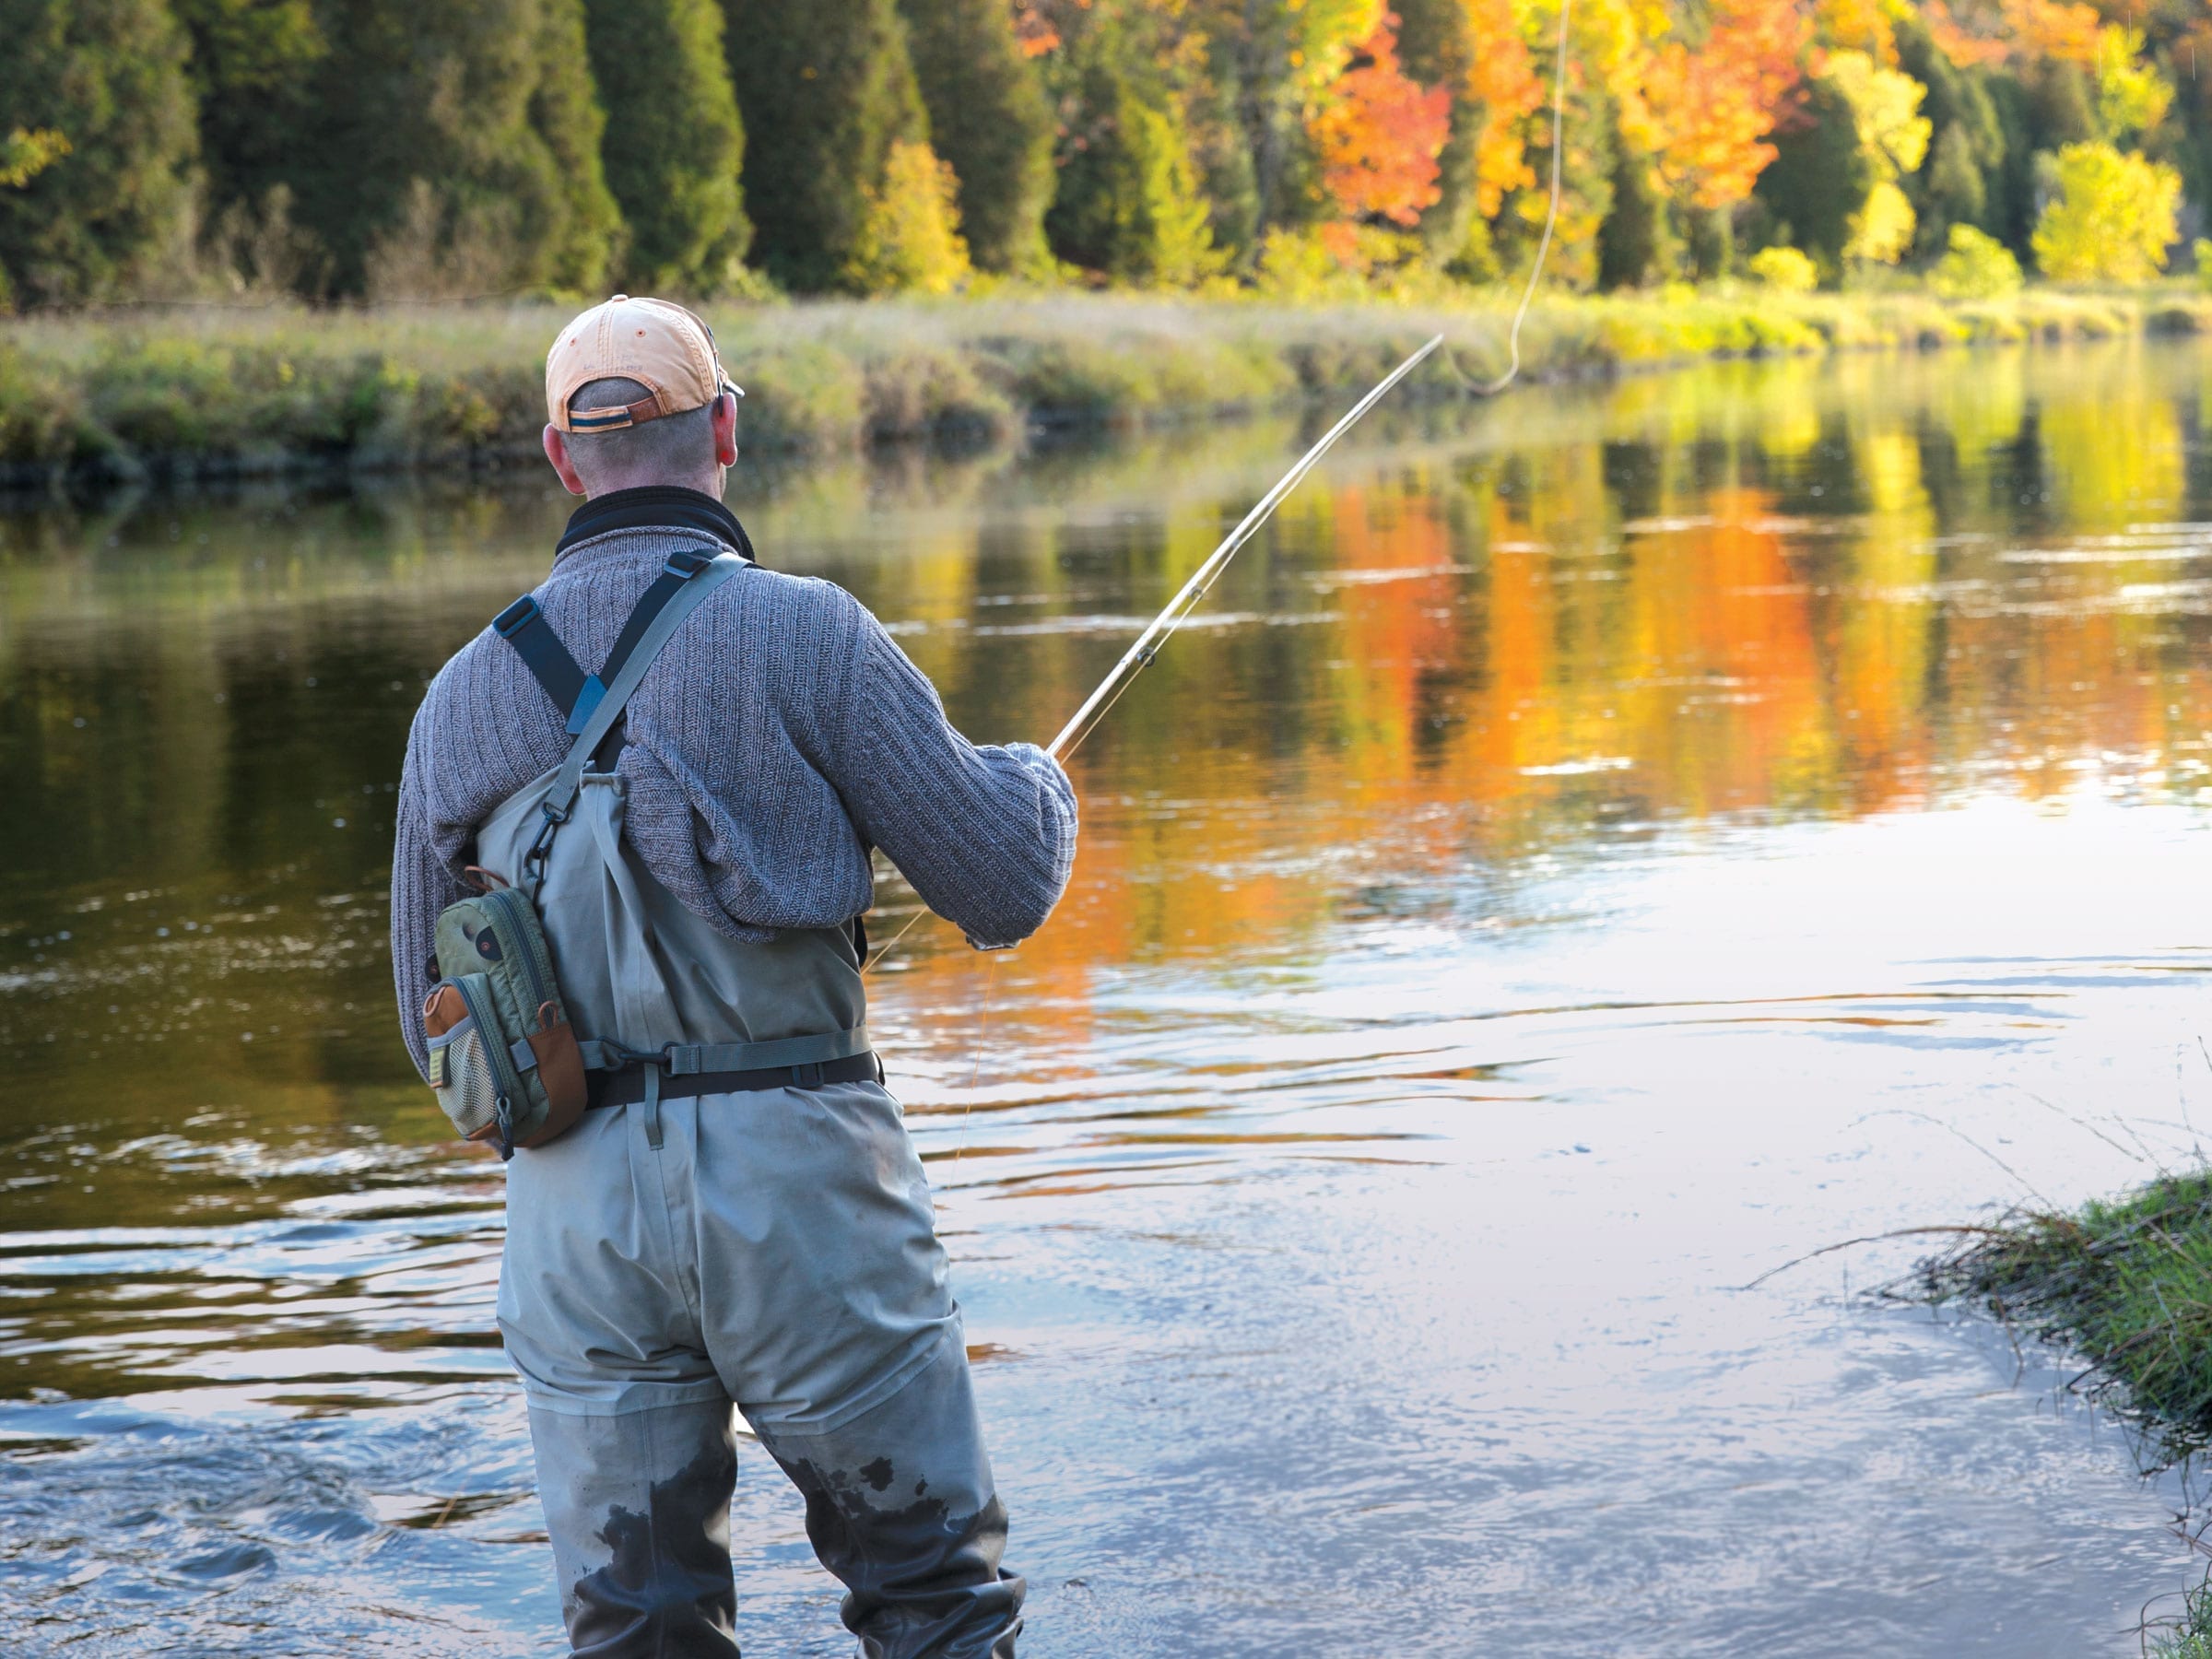 world class fishing for native trout, bass, and landlocked salmon